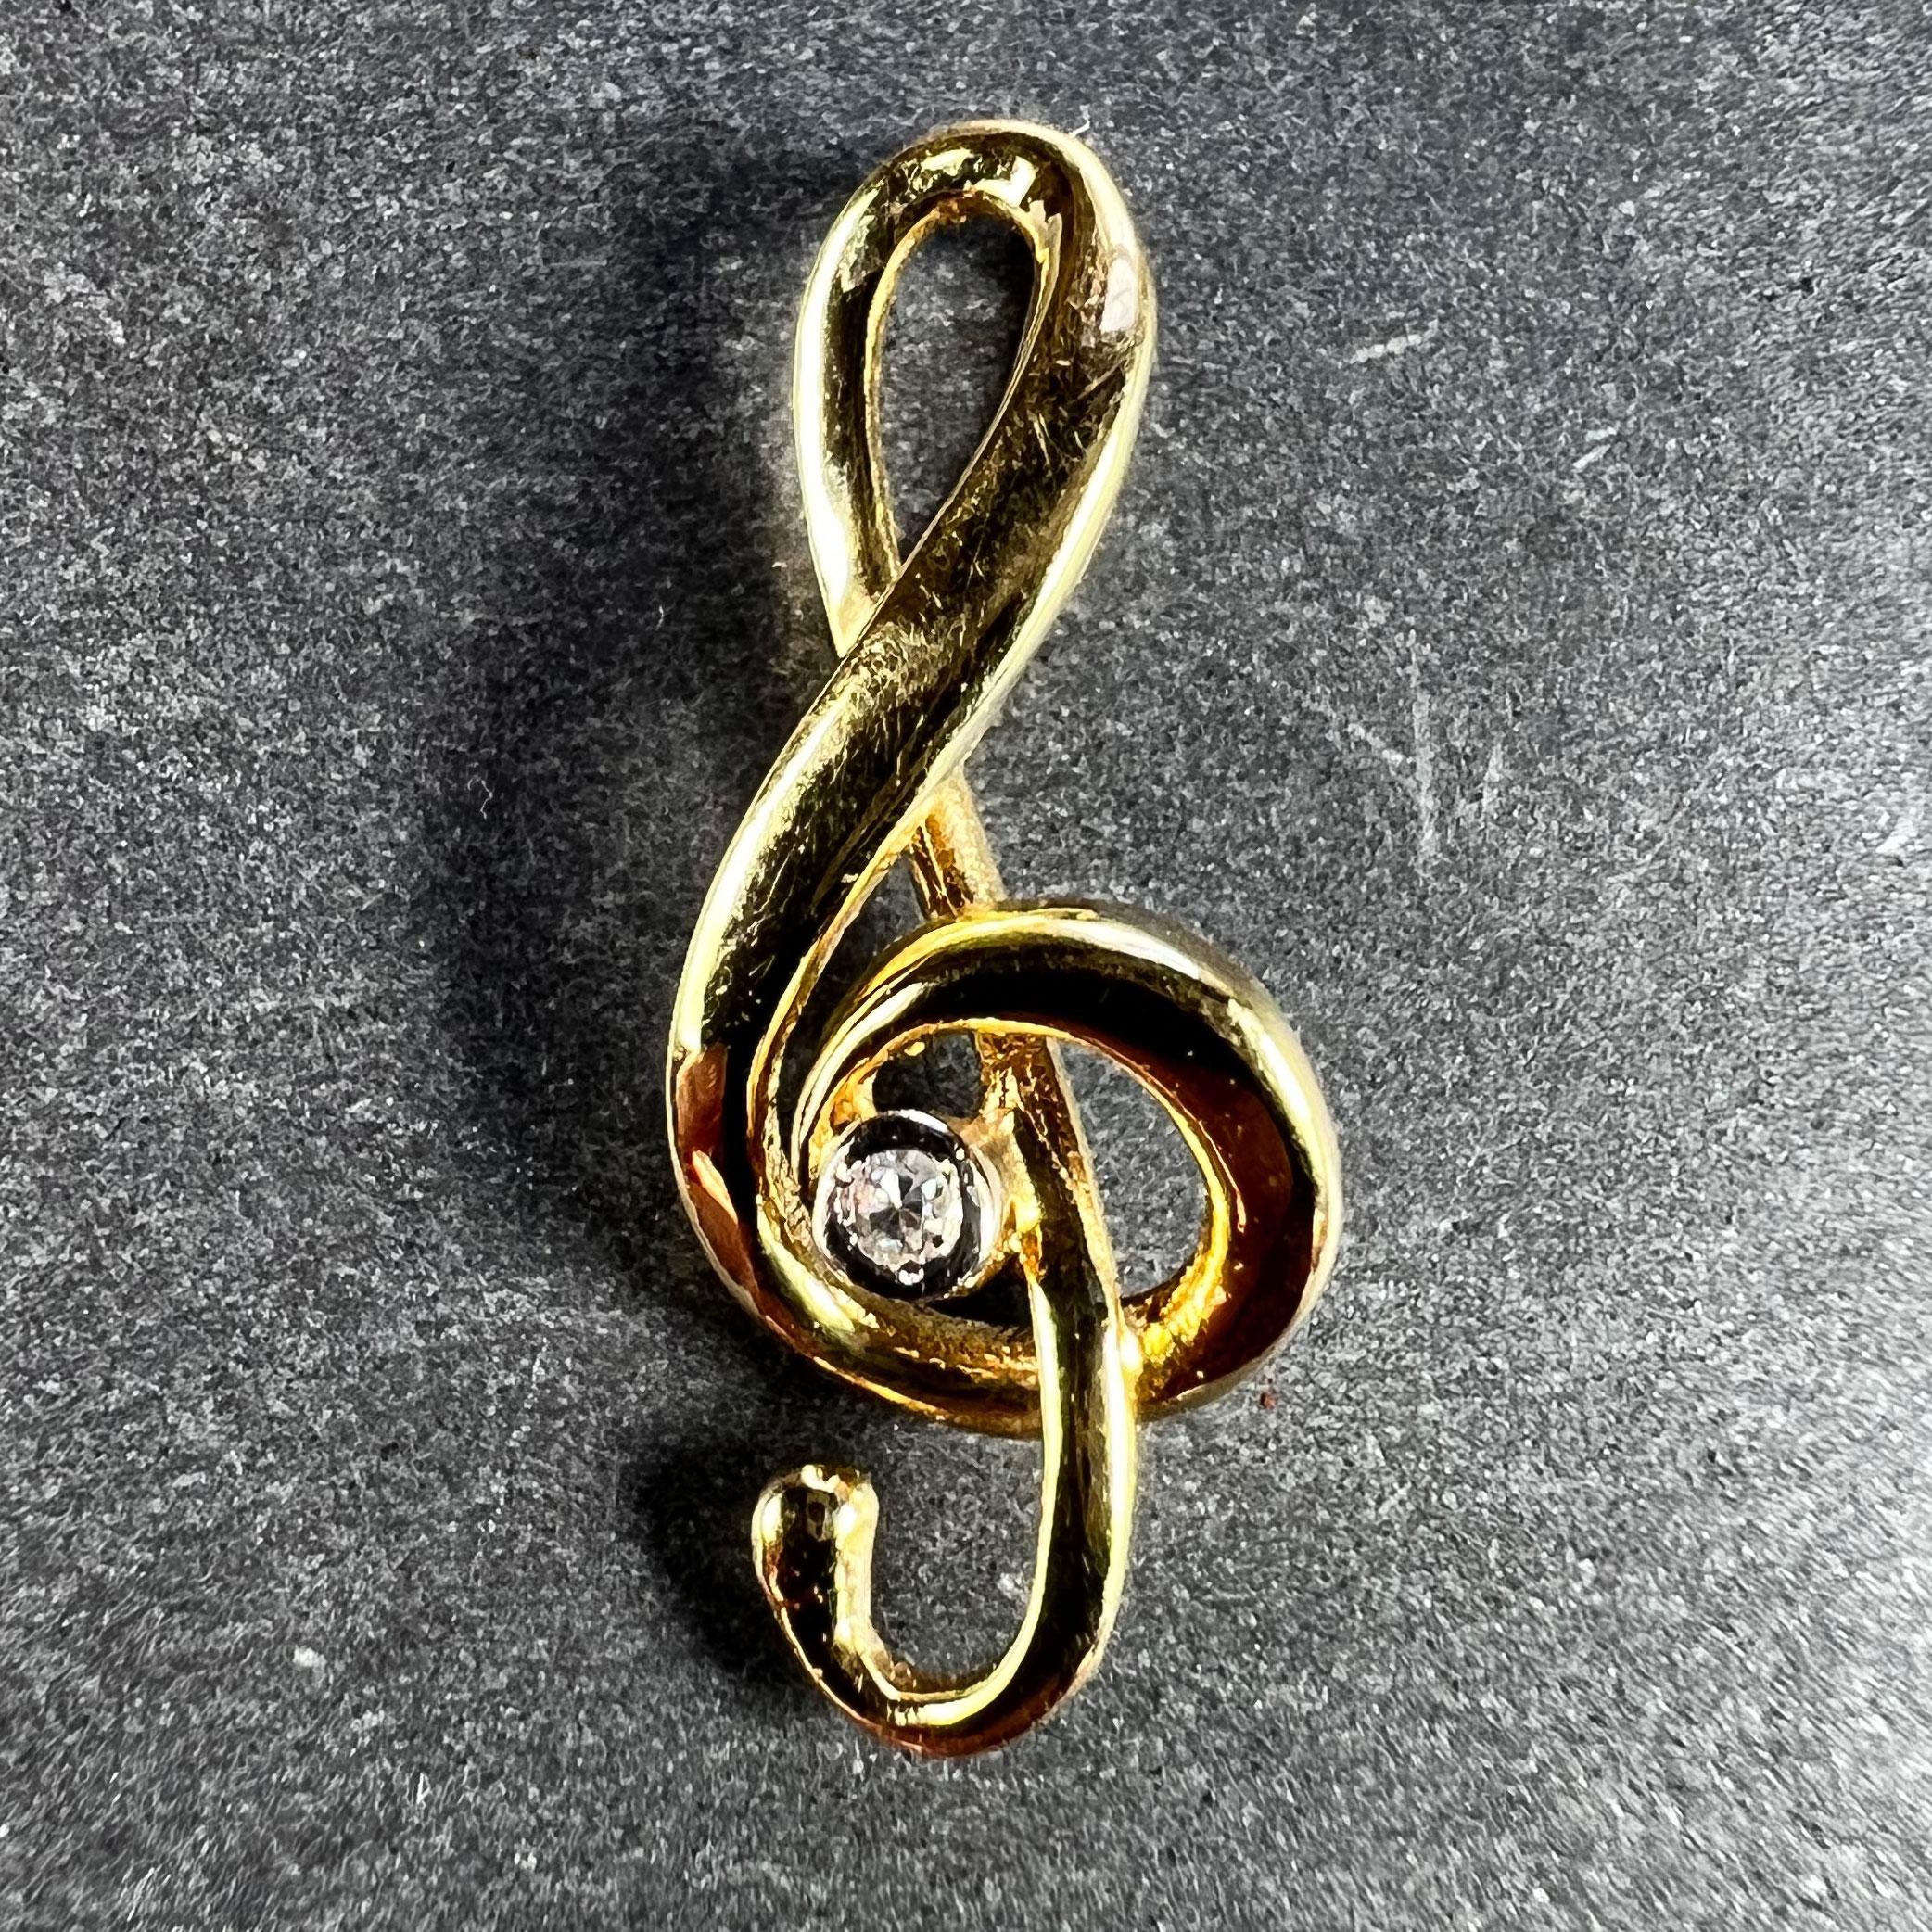 An 18 karat (18K) yellow gold charm pendant designed as the musical note of the treble clef, set to the centre with a single-cut round diamond weighing approximately 0.03 carats. Stamped with the eagle mark for 18 karat gold and French